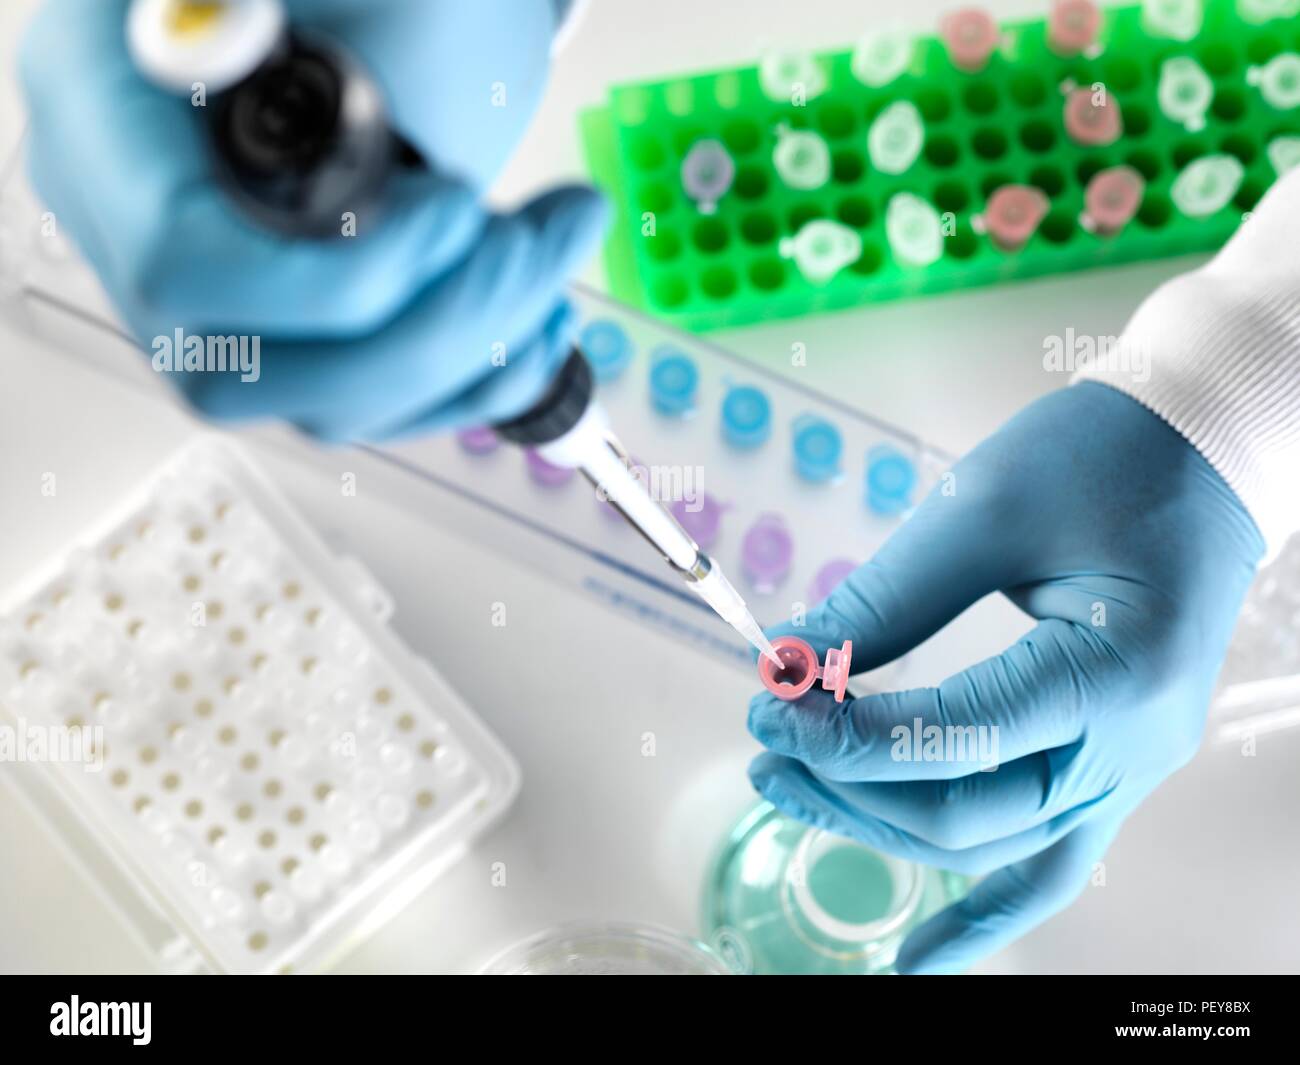 Scientist preparing a sample in an Eppendorf tube for chemical analysis. Stock Photo